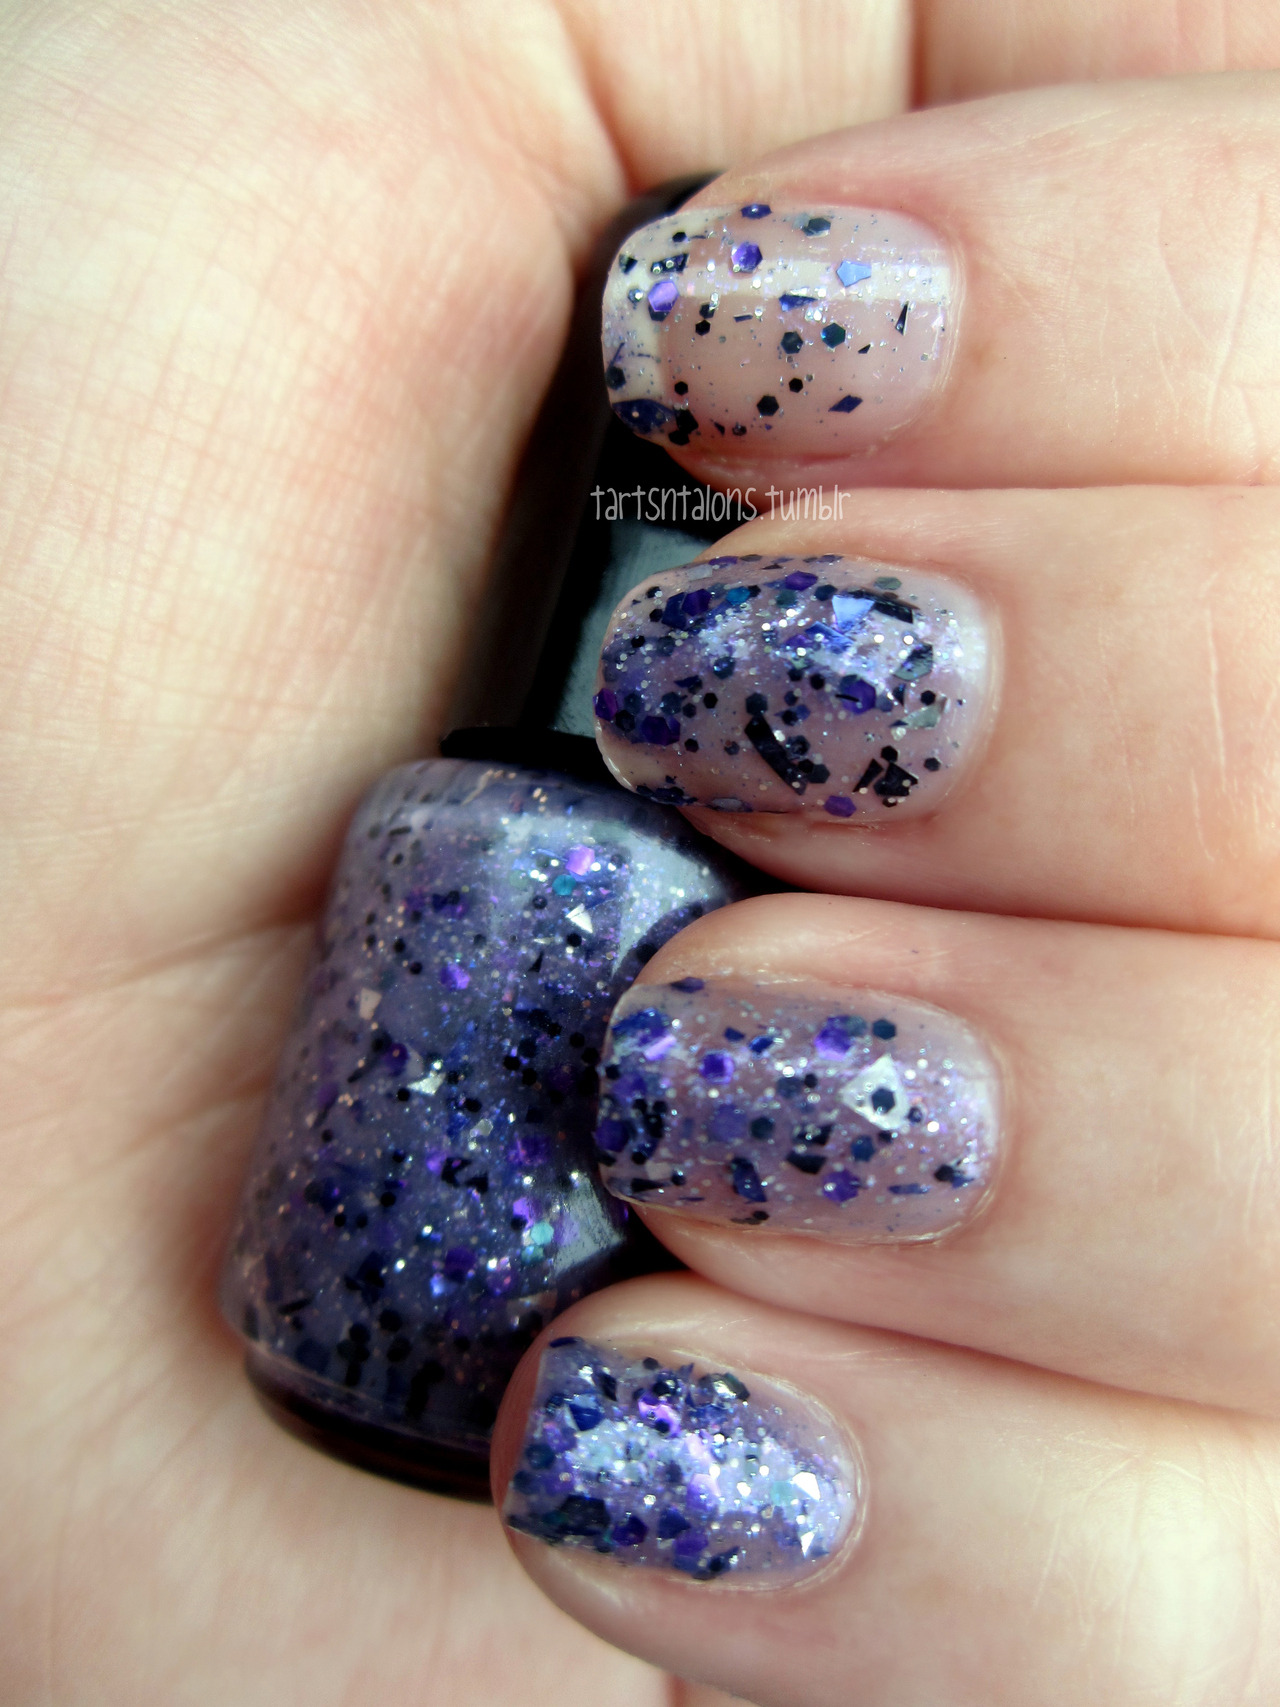 I used just one coat of Moonlit Cheshire over my gradient nails. So pretty!